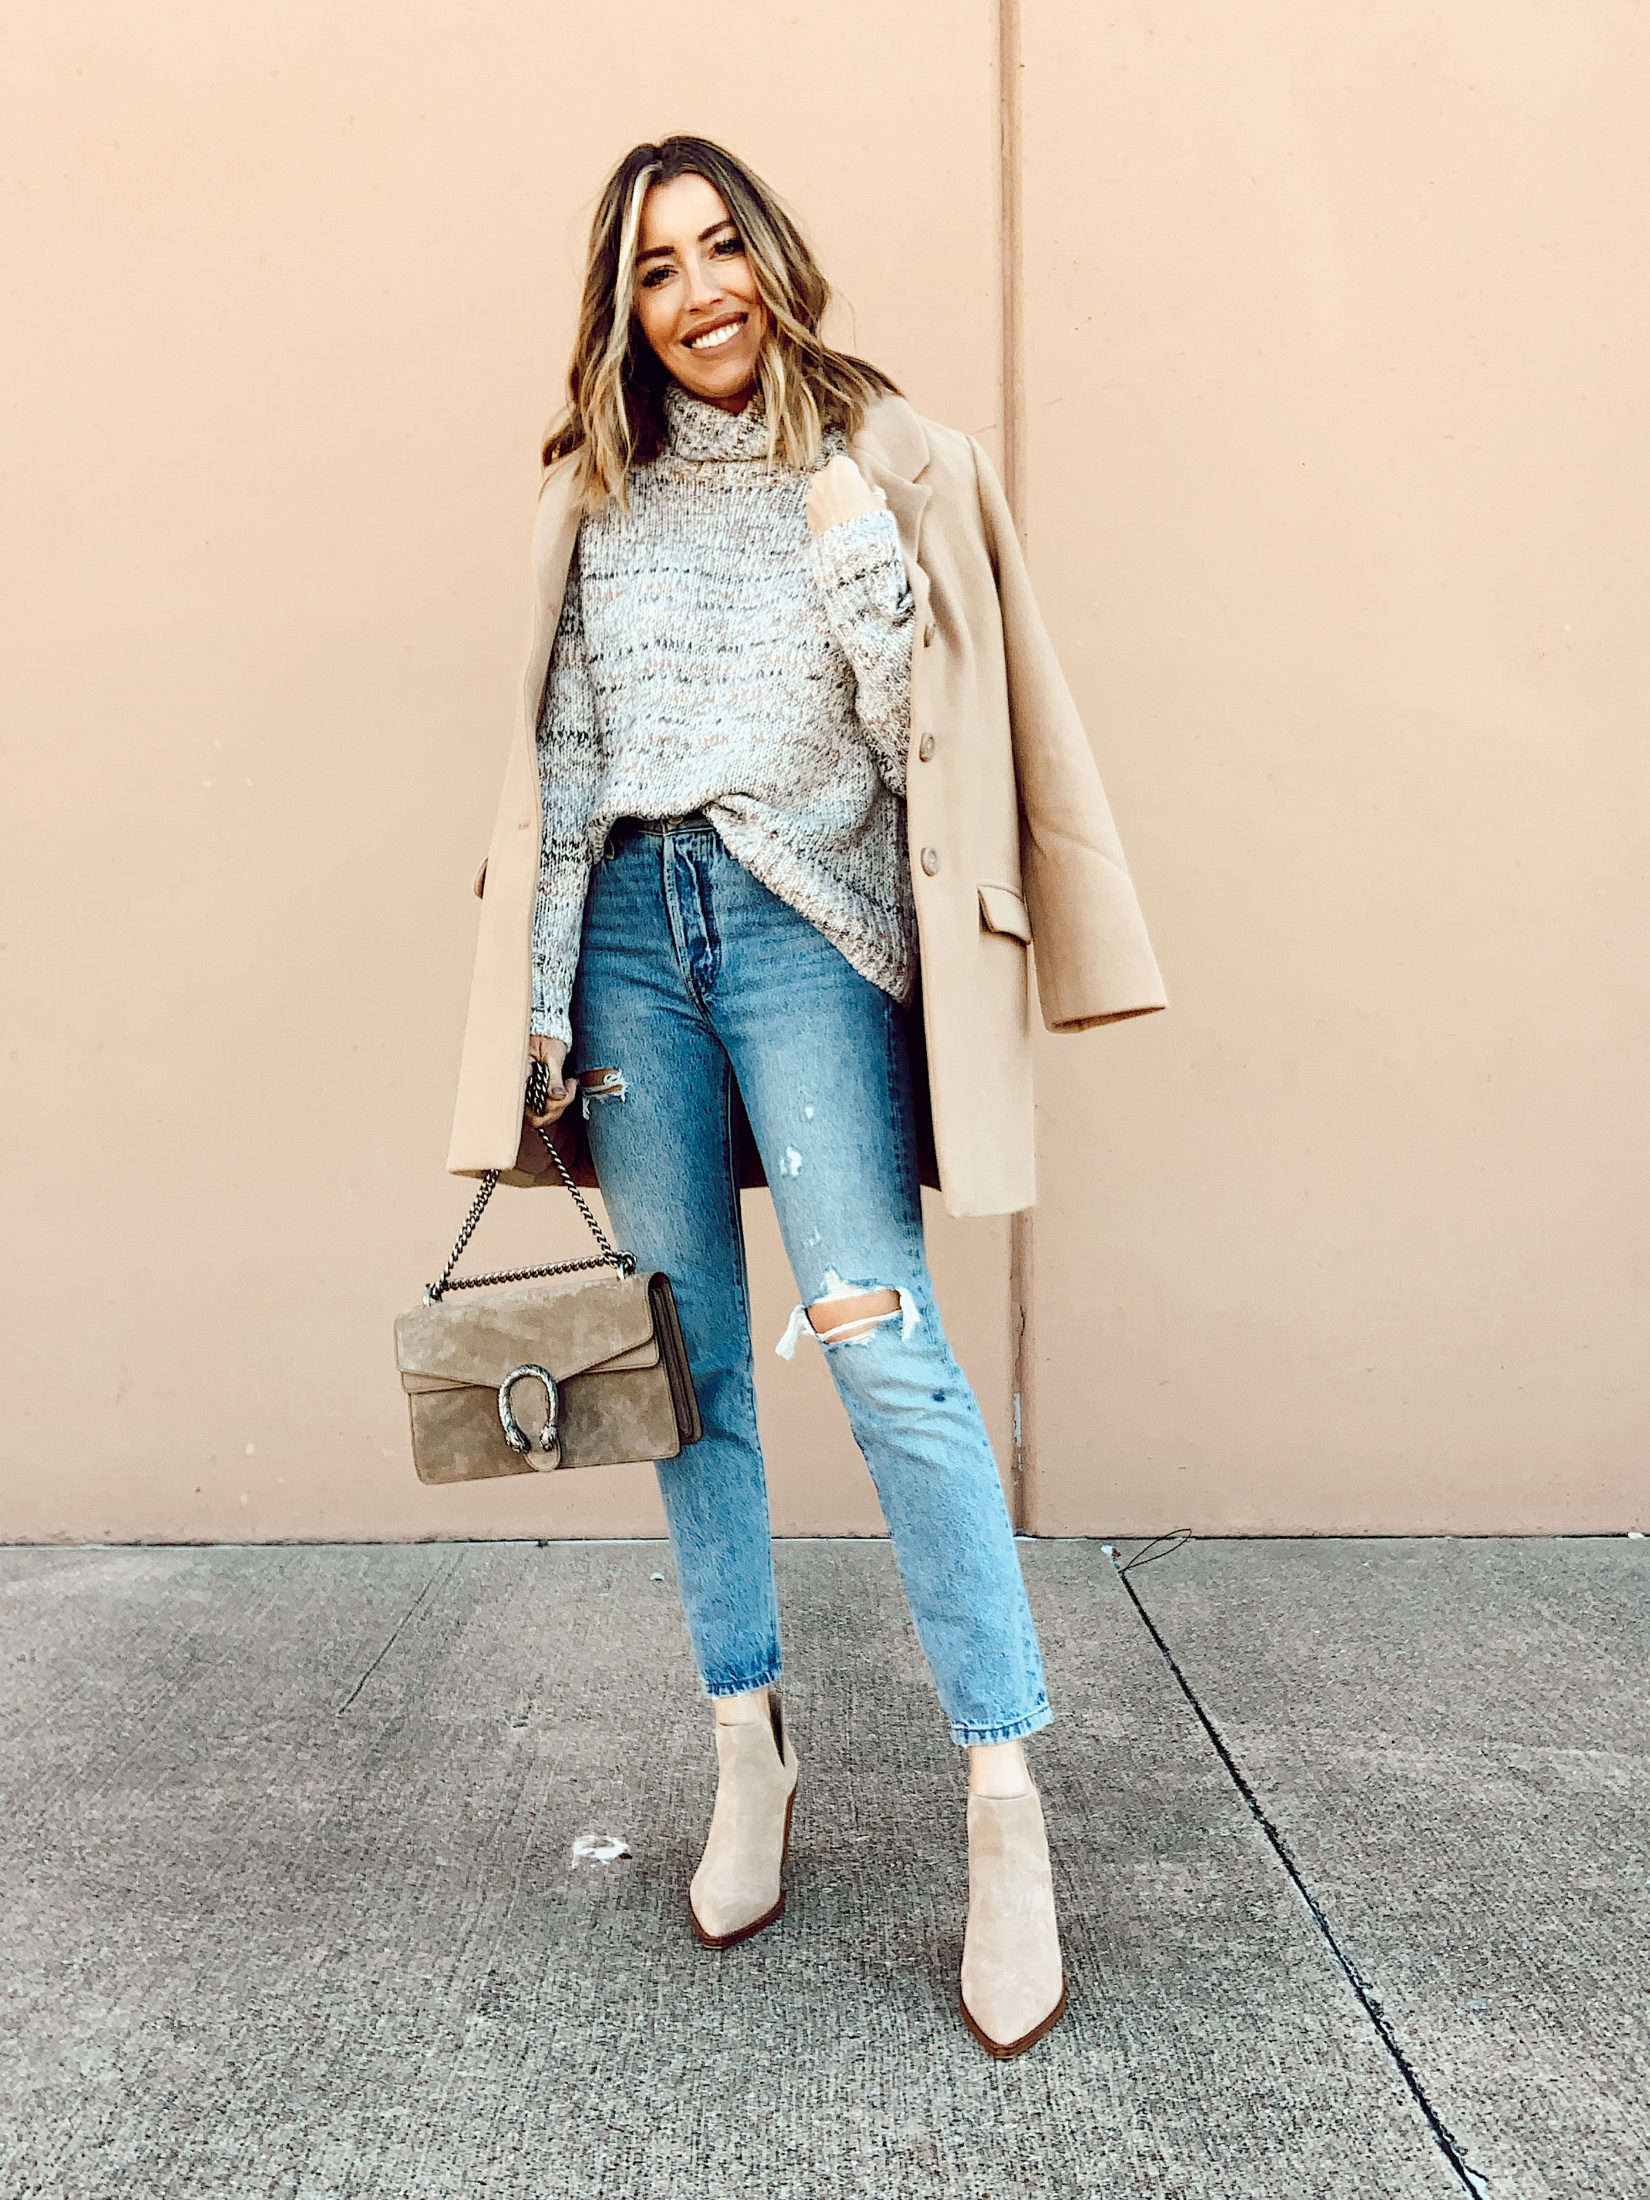 Cozy Sweaters for the Holidays - The Real Fashionista